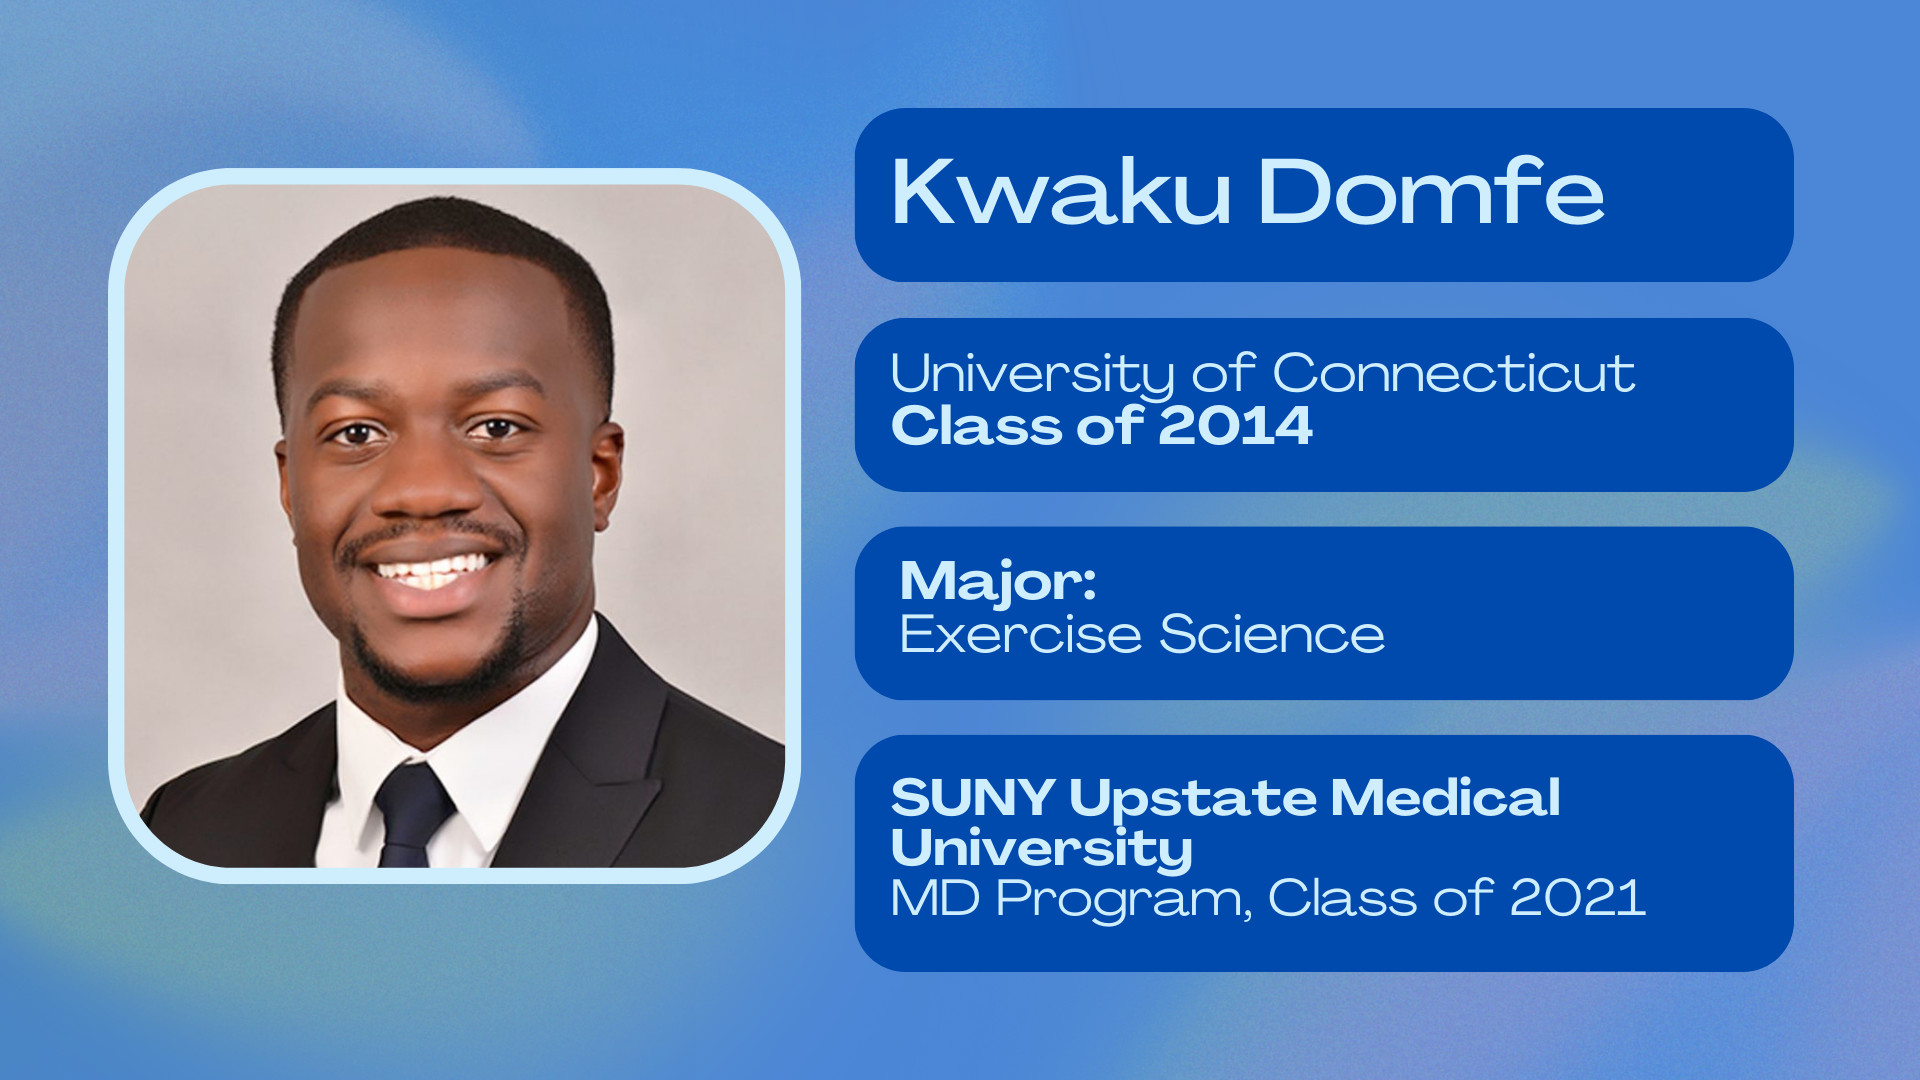 Kwaku Domfe; University of Connecticut class of 2014; Major: Exercise science; SUNY UPstate medical university class of 2021